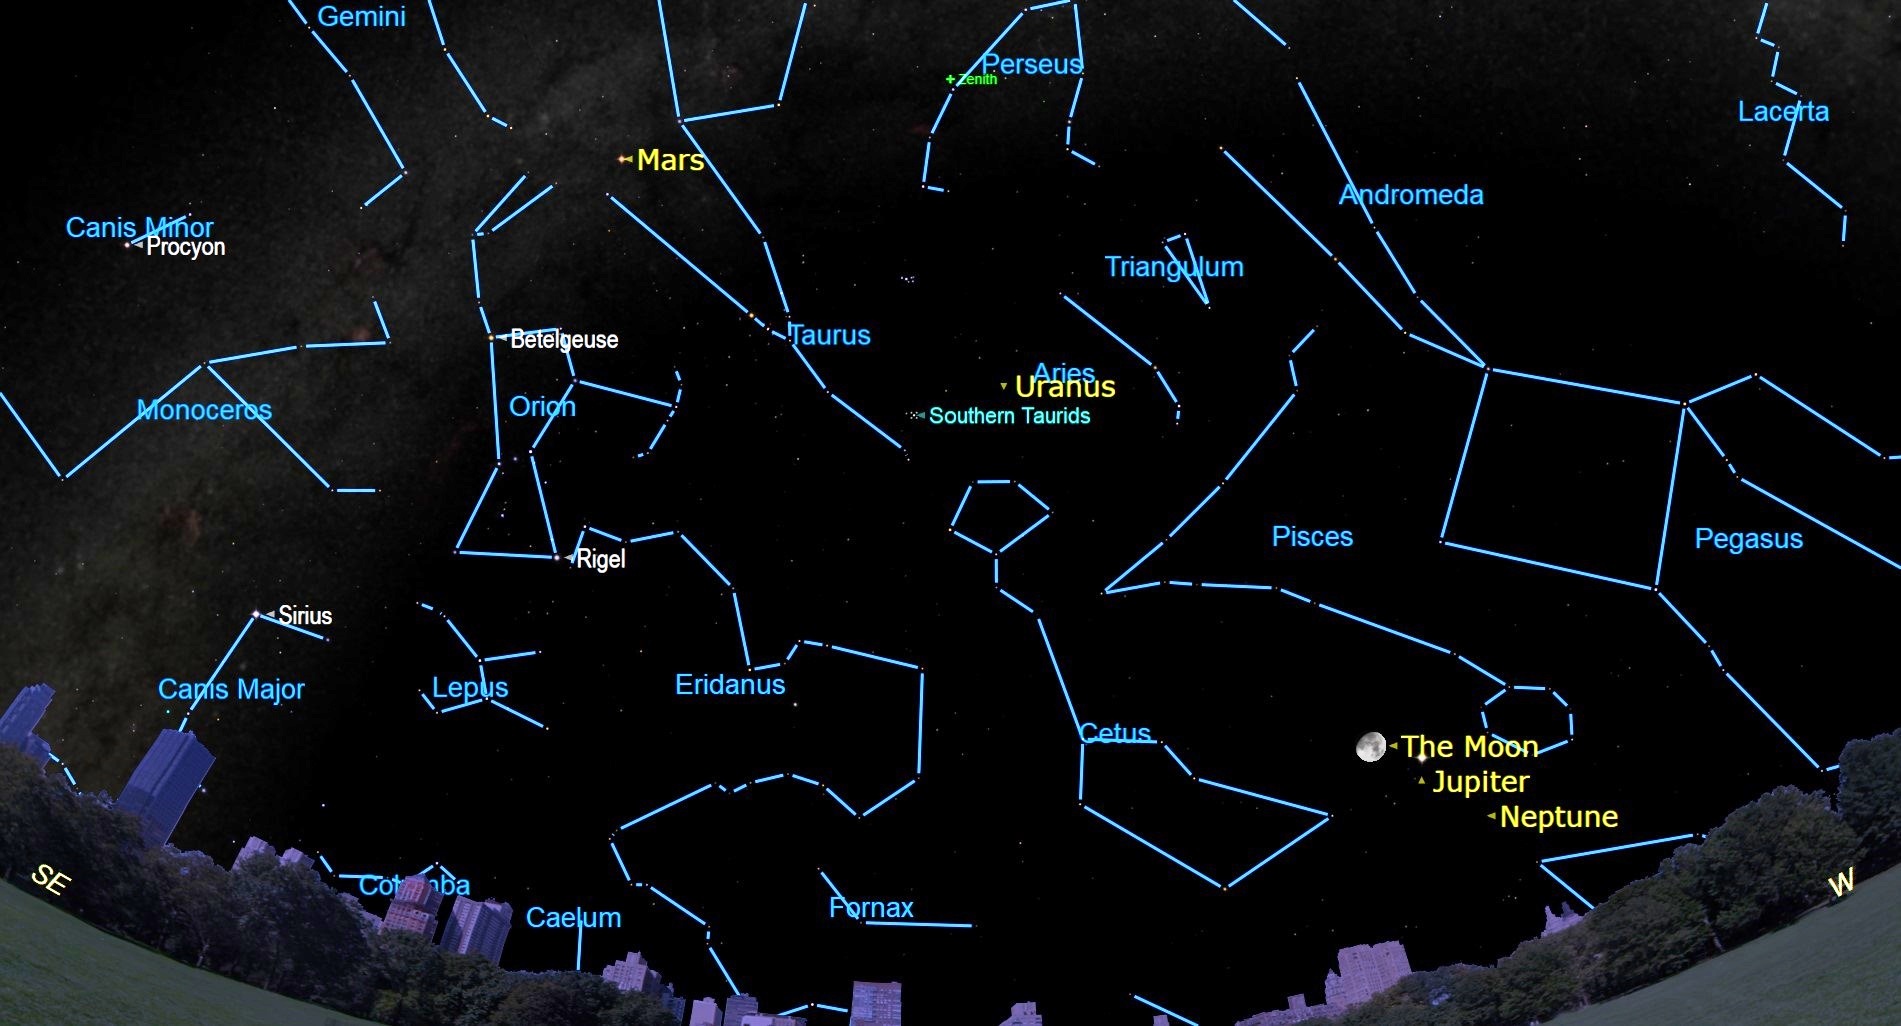 An image of the night sky on November 5 with the constellation Taurus, from which the Southern Taurians will emerge.